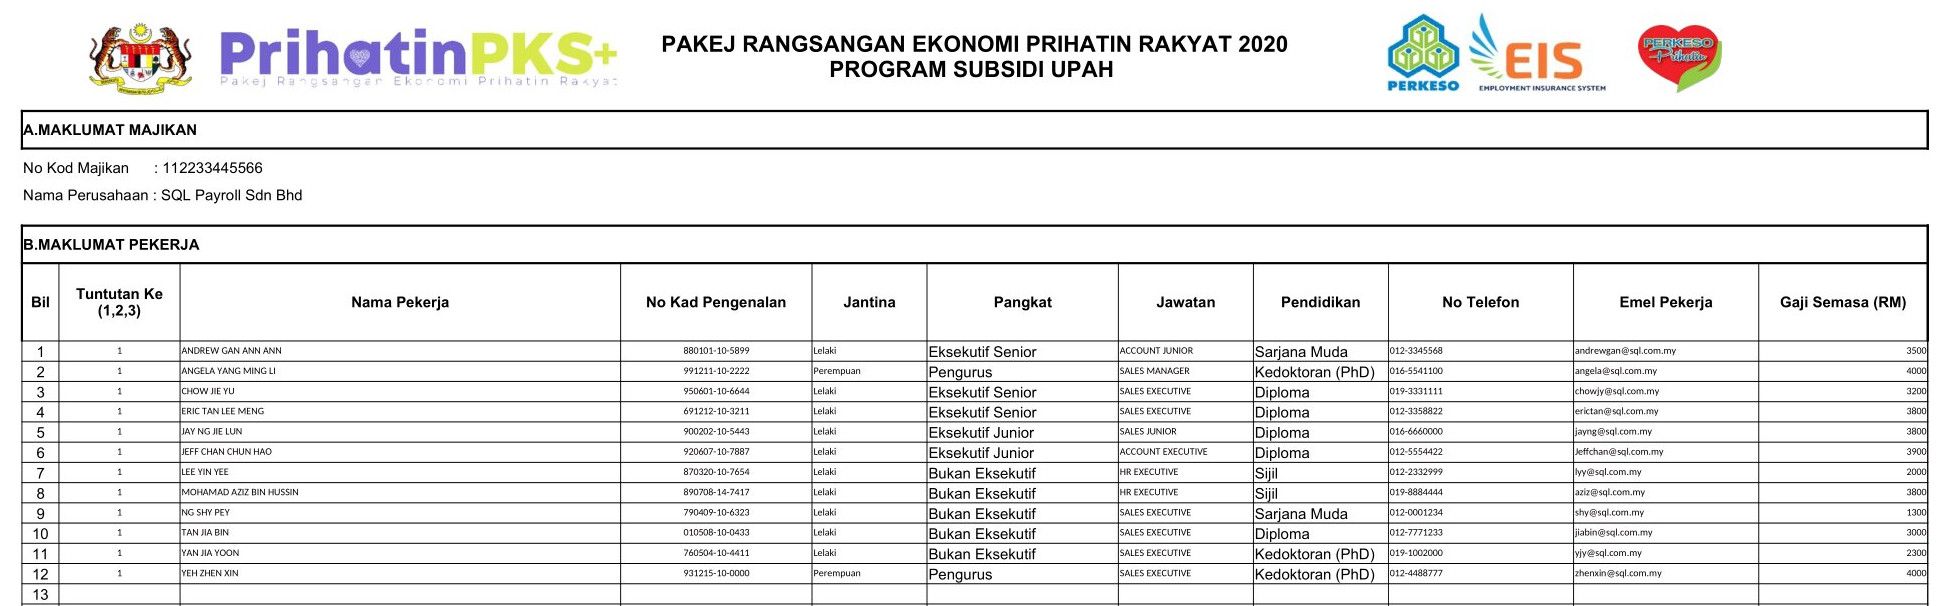 Psu 3.0 socso Affected by